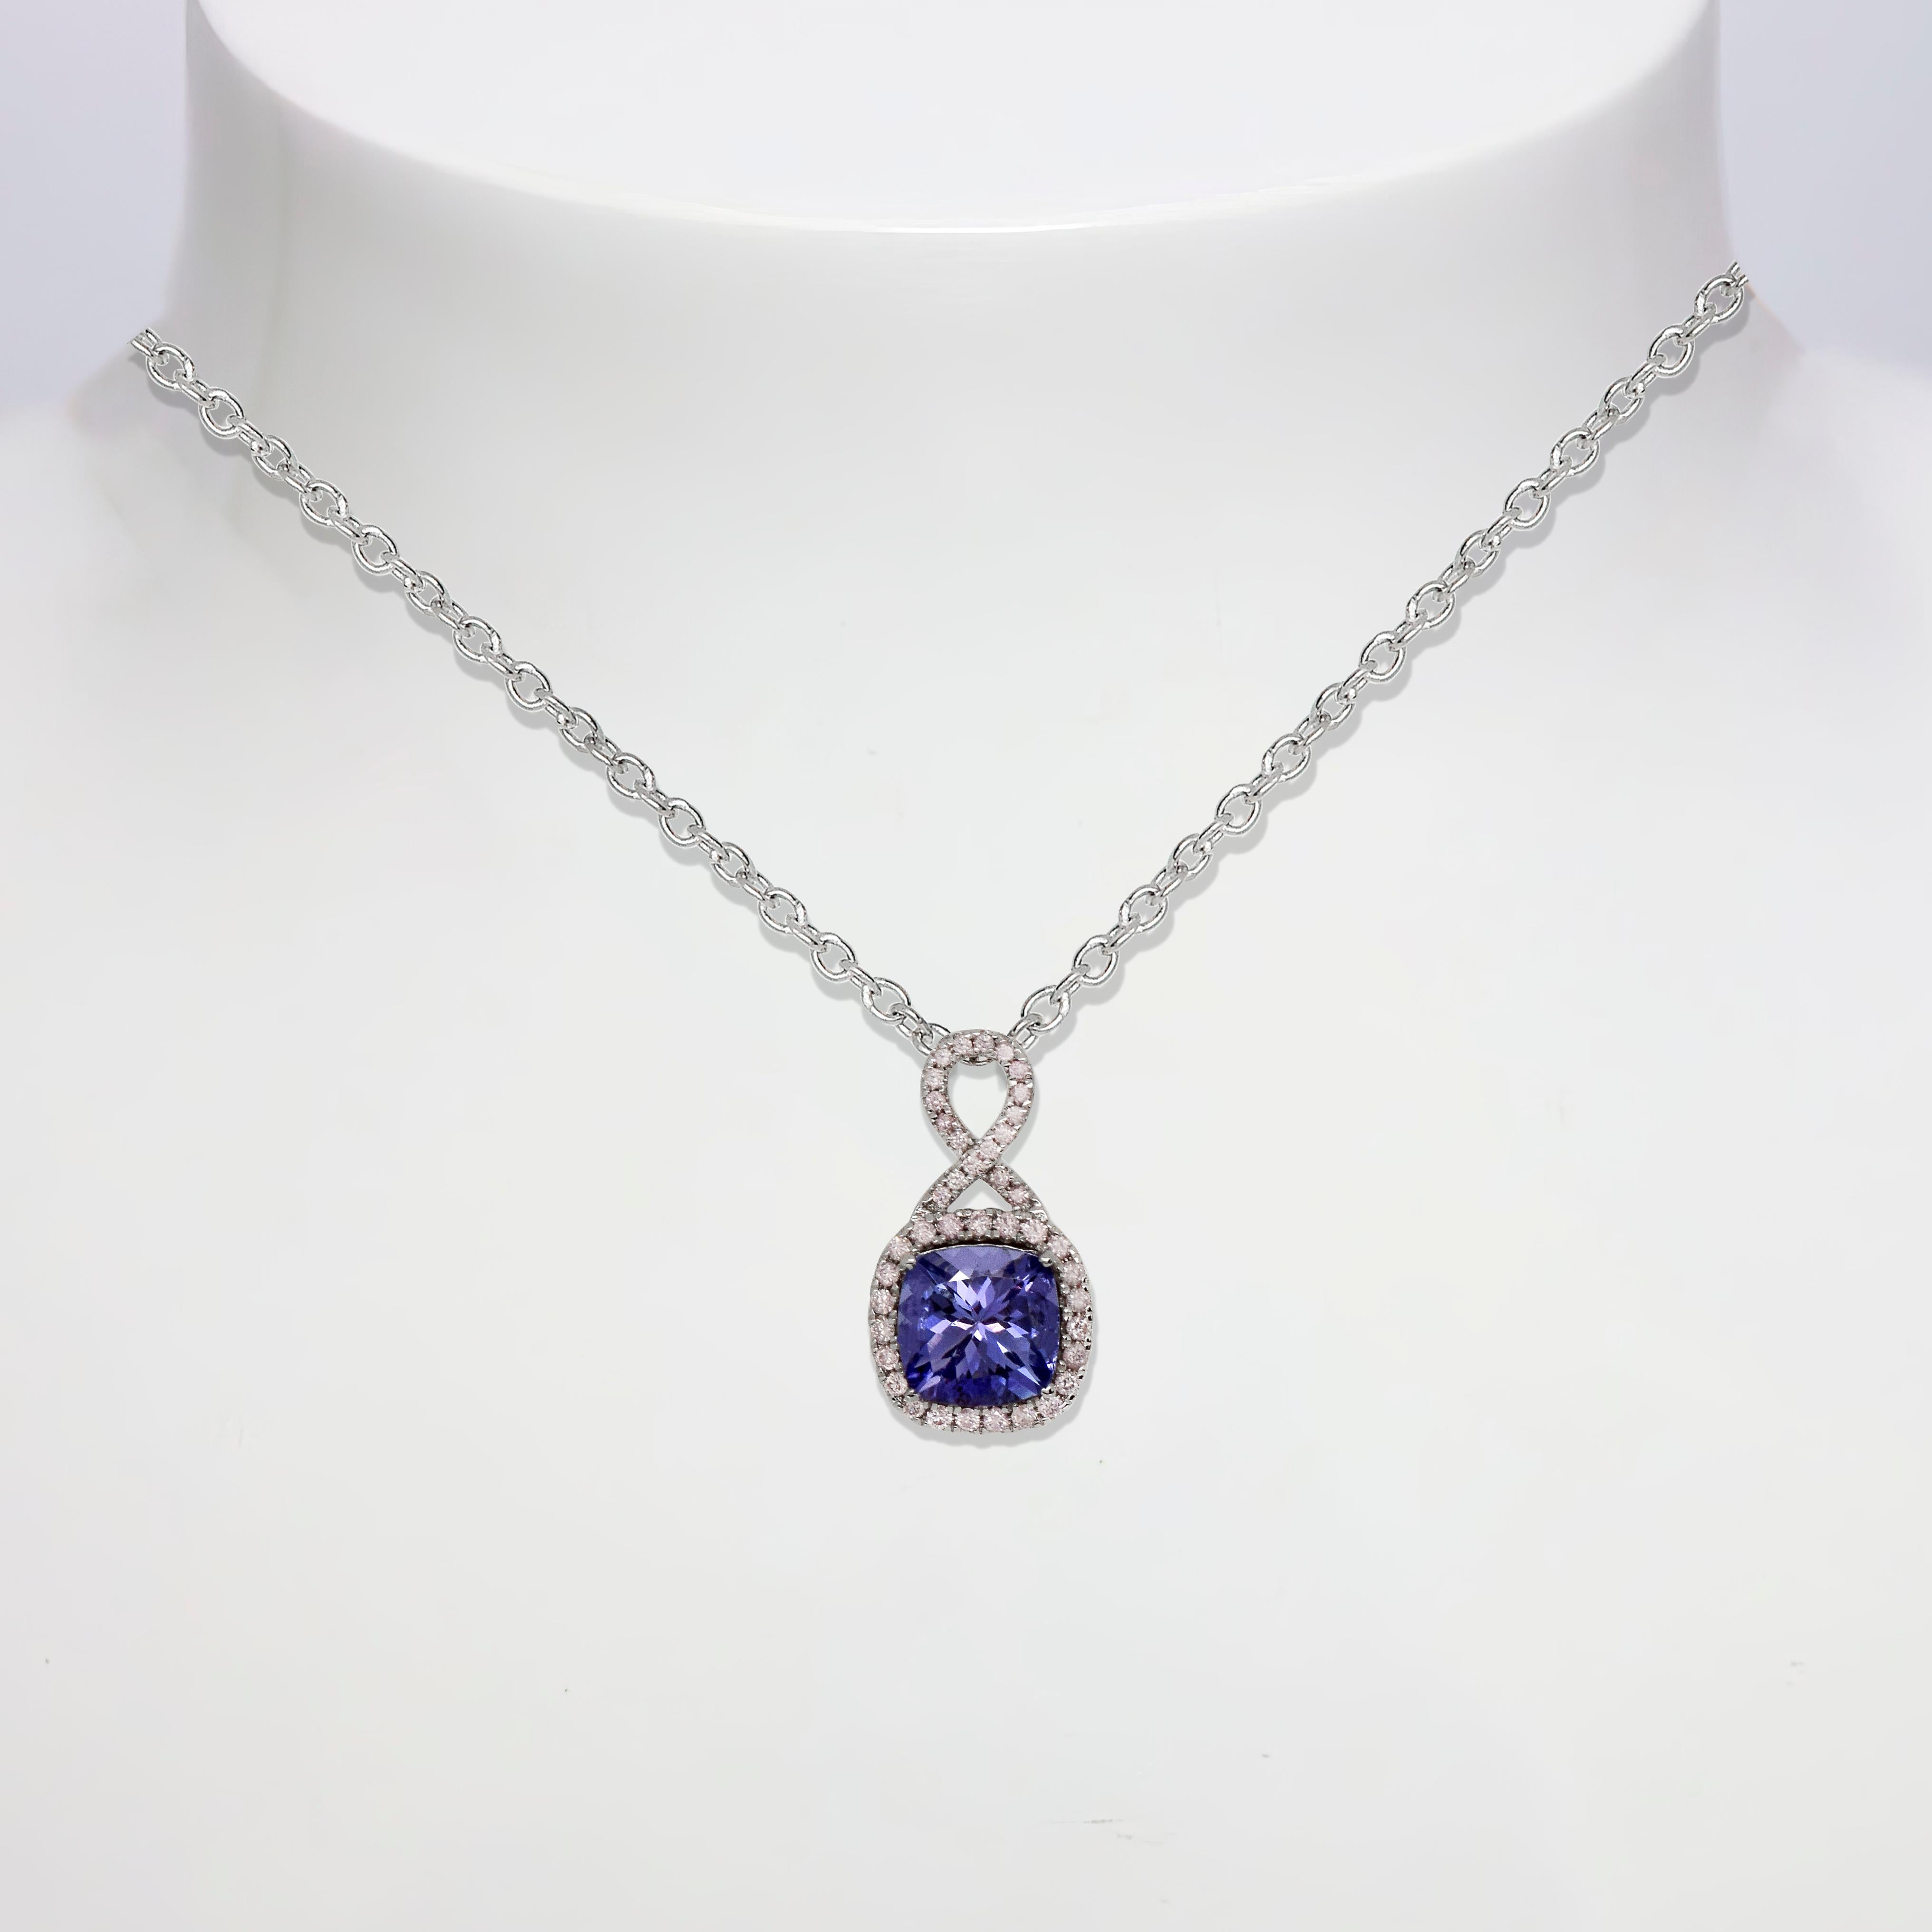 *IGI 14K 2.08 ct Tanzanite&Pink Diamond Antique Pendant Necklace*
The natural bluish violet tanzanite, weighing 2.08 ct, is the center stone surrounded by natural pink diamonds weighing 0.45 ct on the 14K white gold halo design band.

The classic